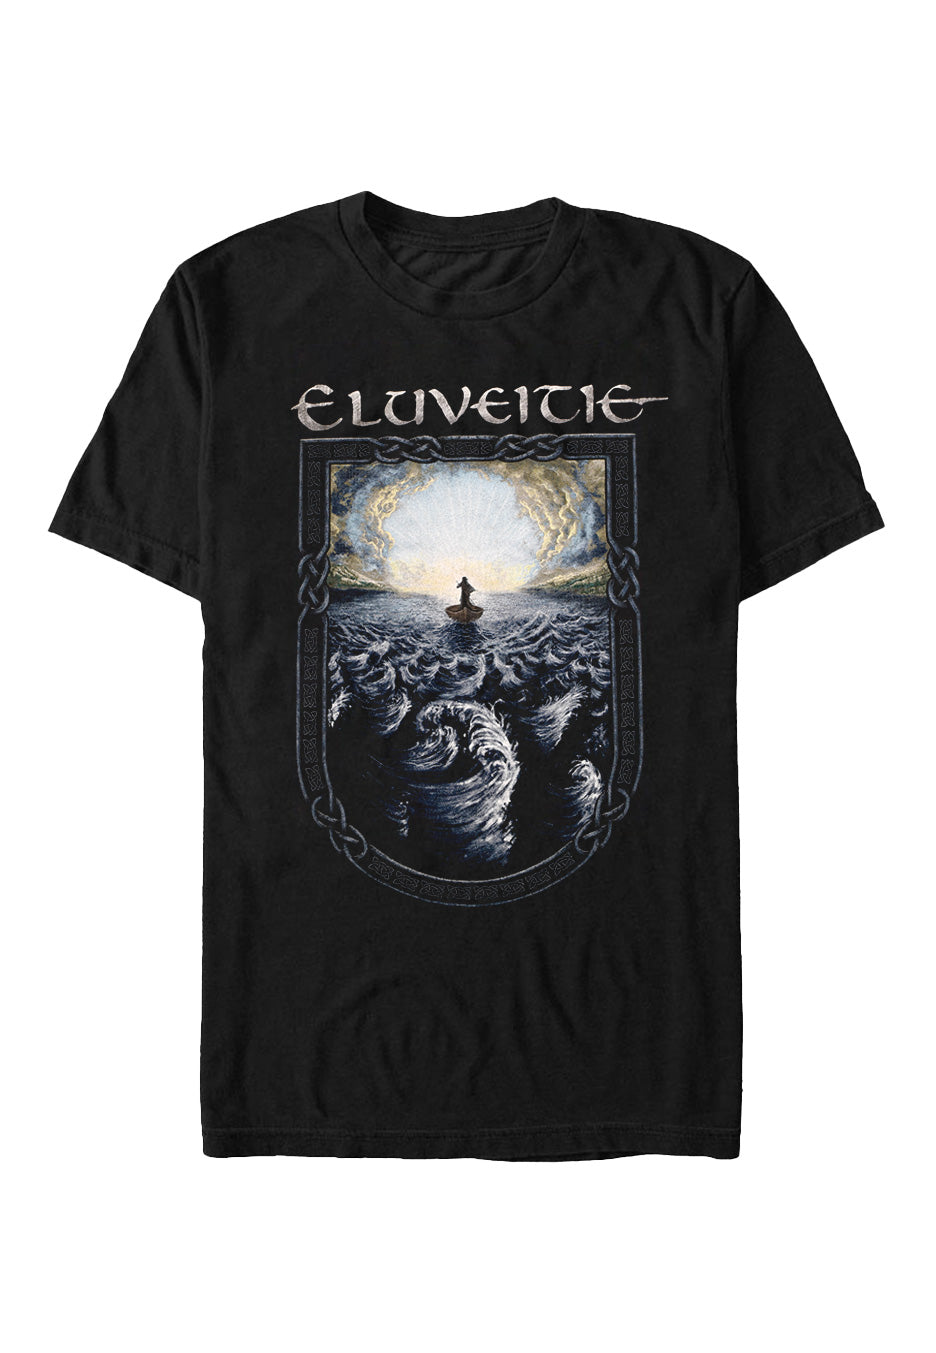 Eluveitie - Into The Light - T-Shirt